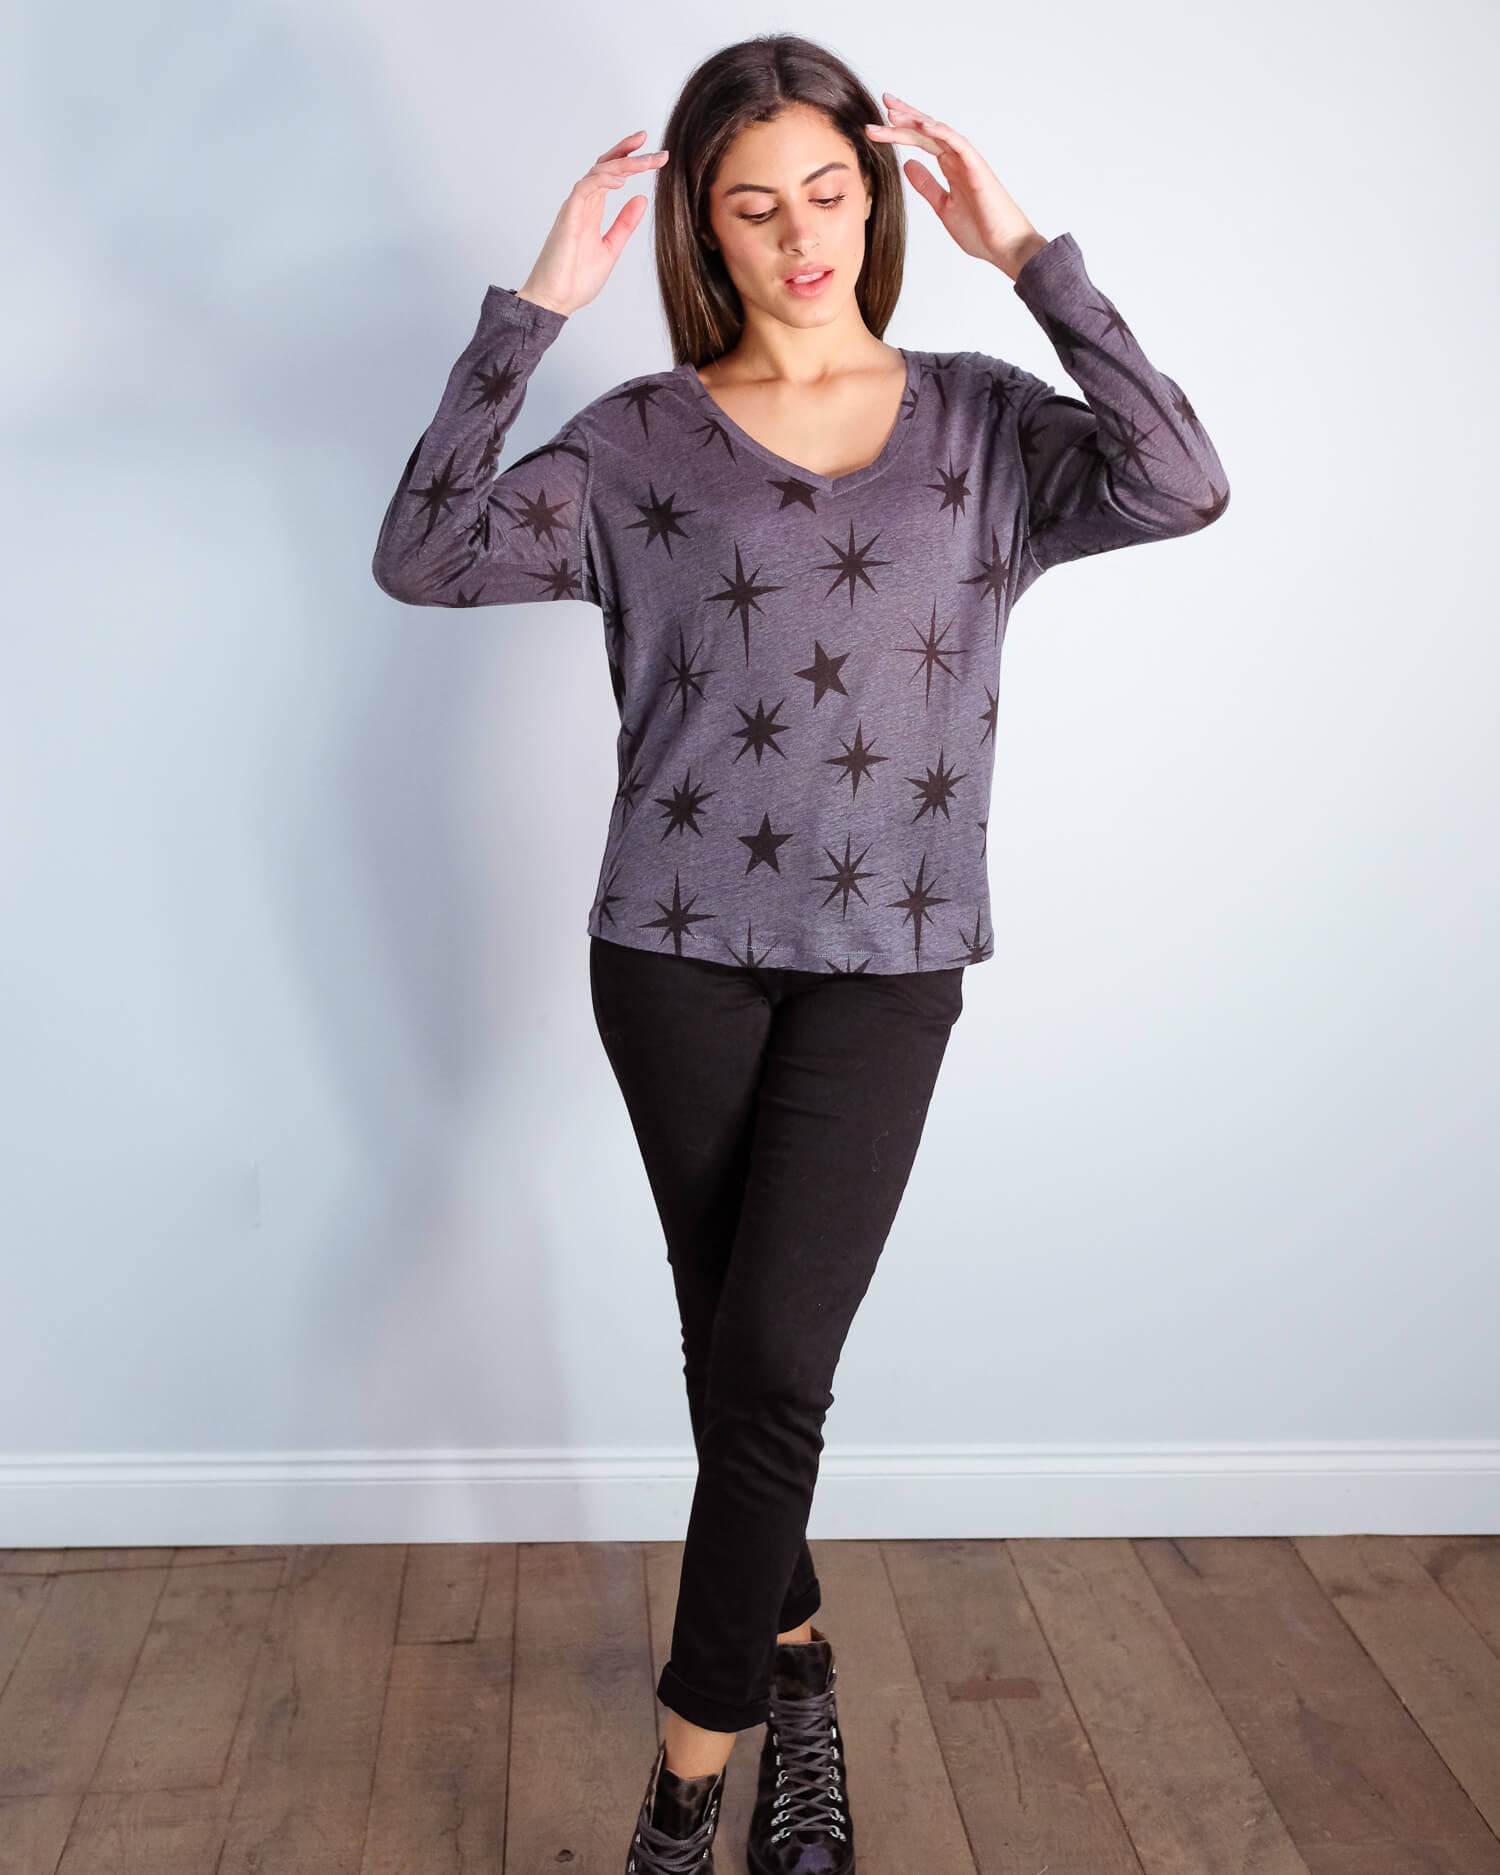 R Sami top in charcoal